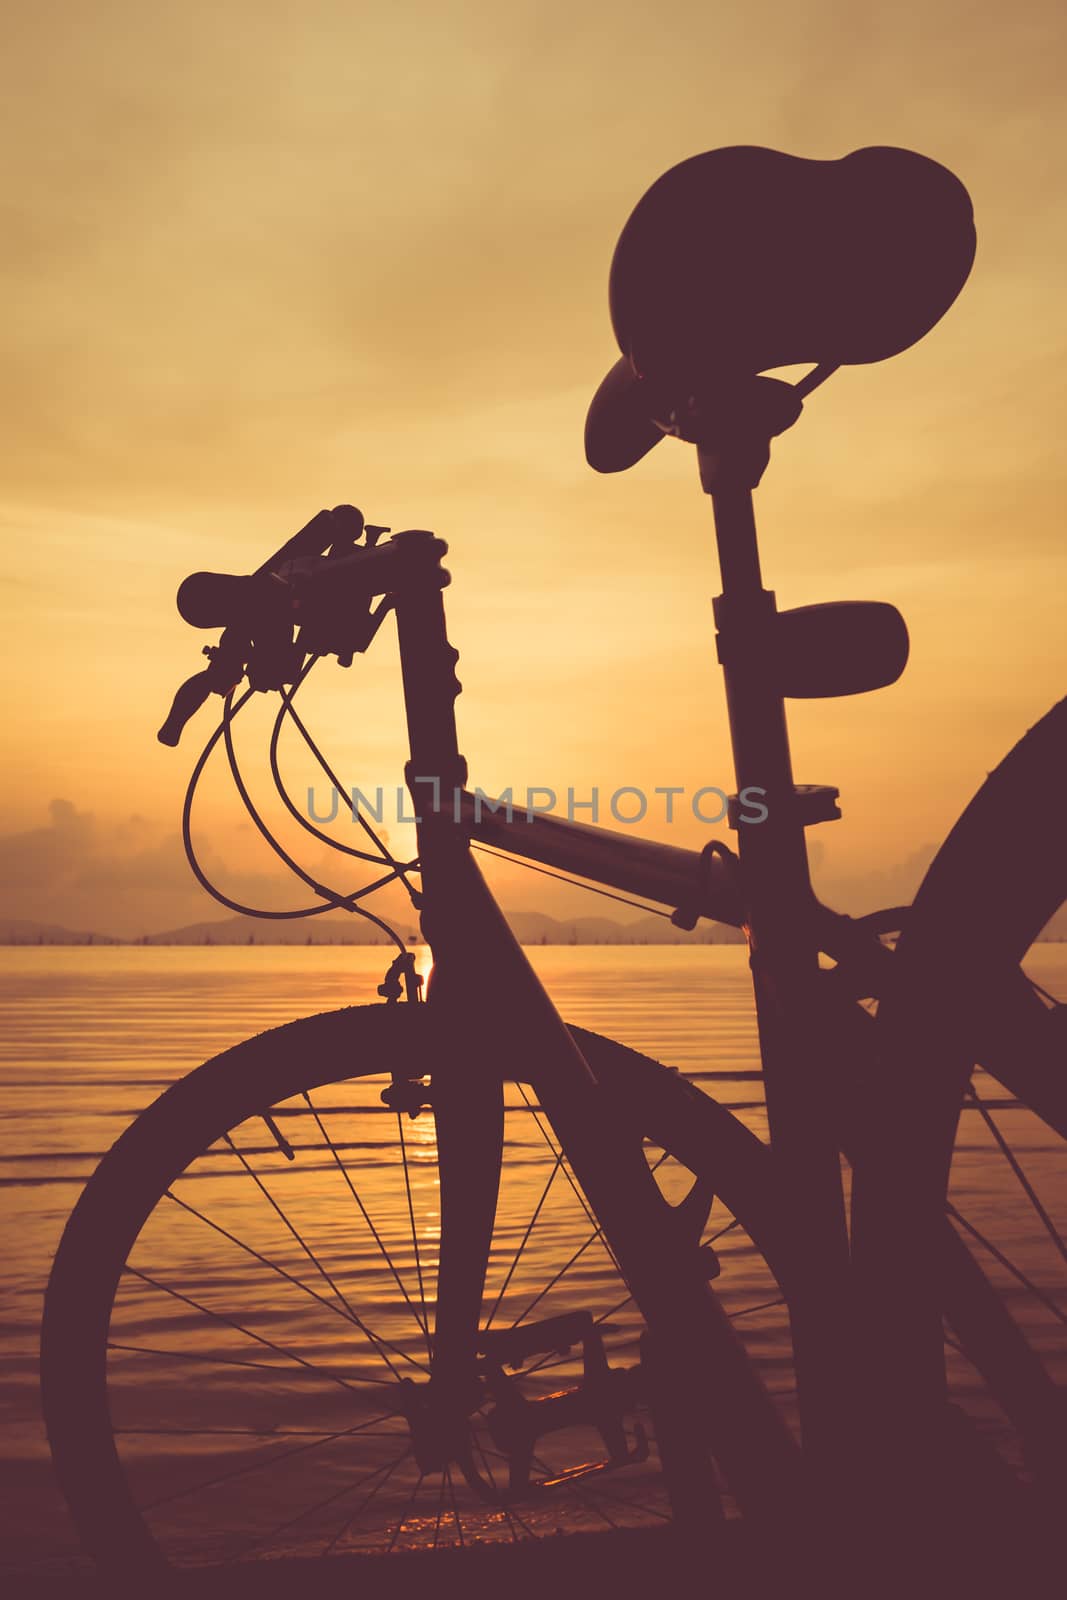 Silhouette of bicycle on the beach against colorful sunset in the sea, orange sky background. Outdoors. Vintage picture style.